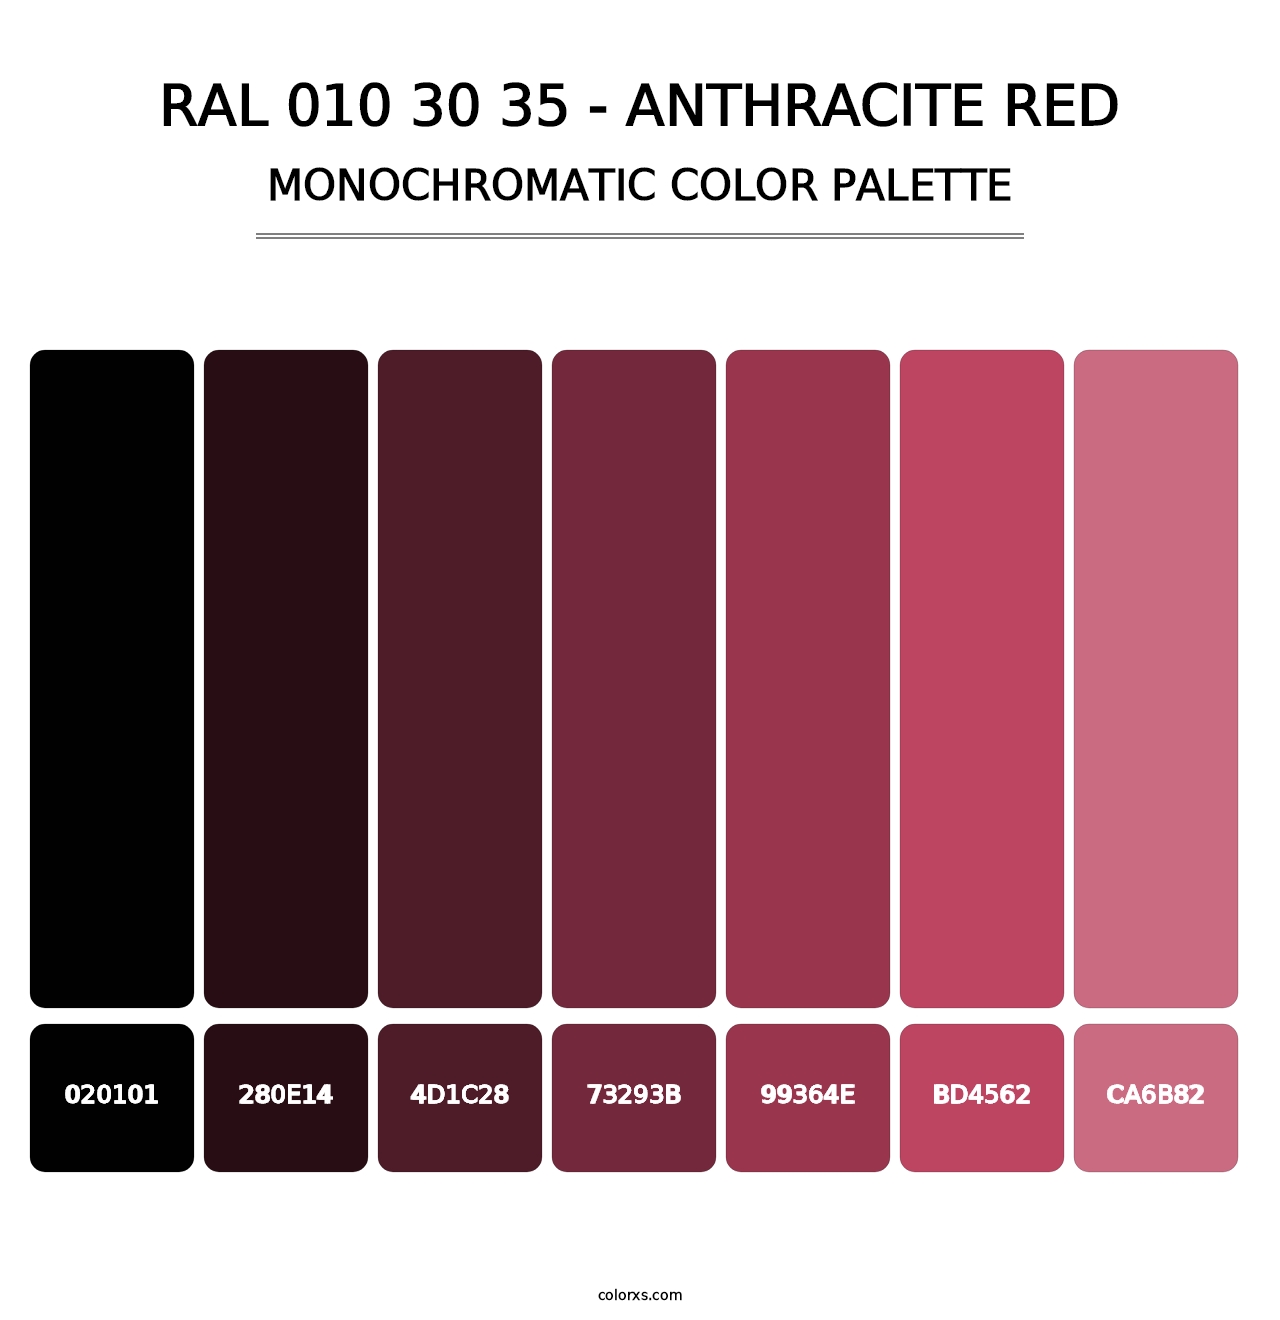 RAL 010 30 35 - Anthracite Red - Monochromatic Color Palette